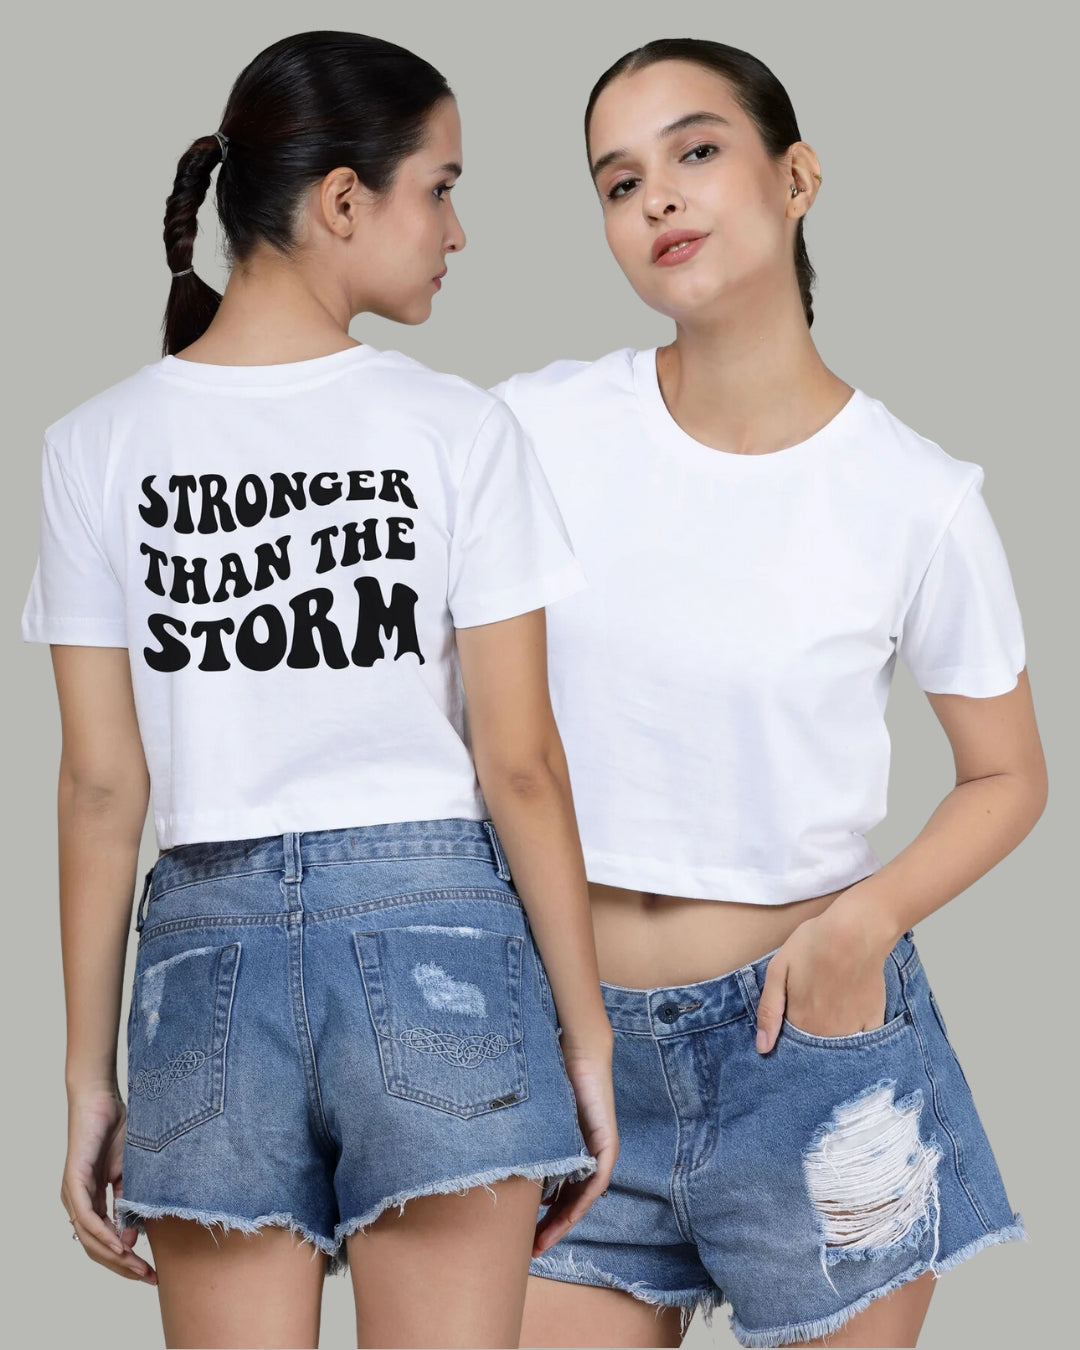 Stronger than storm-Printed Crop Top